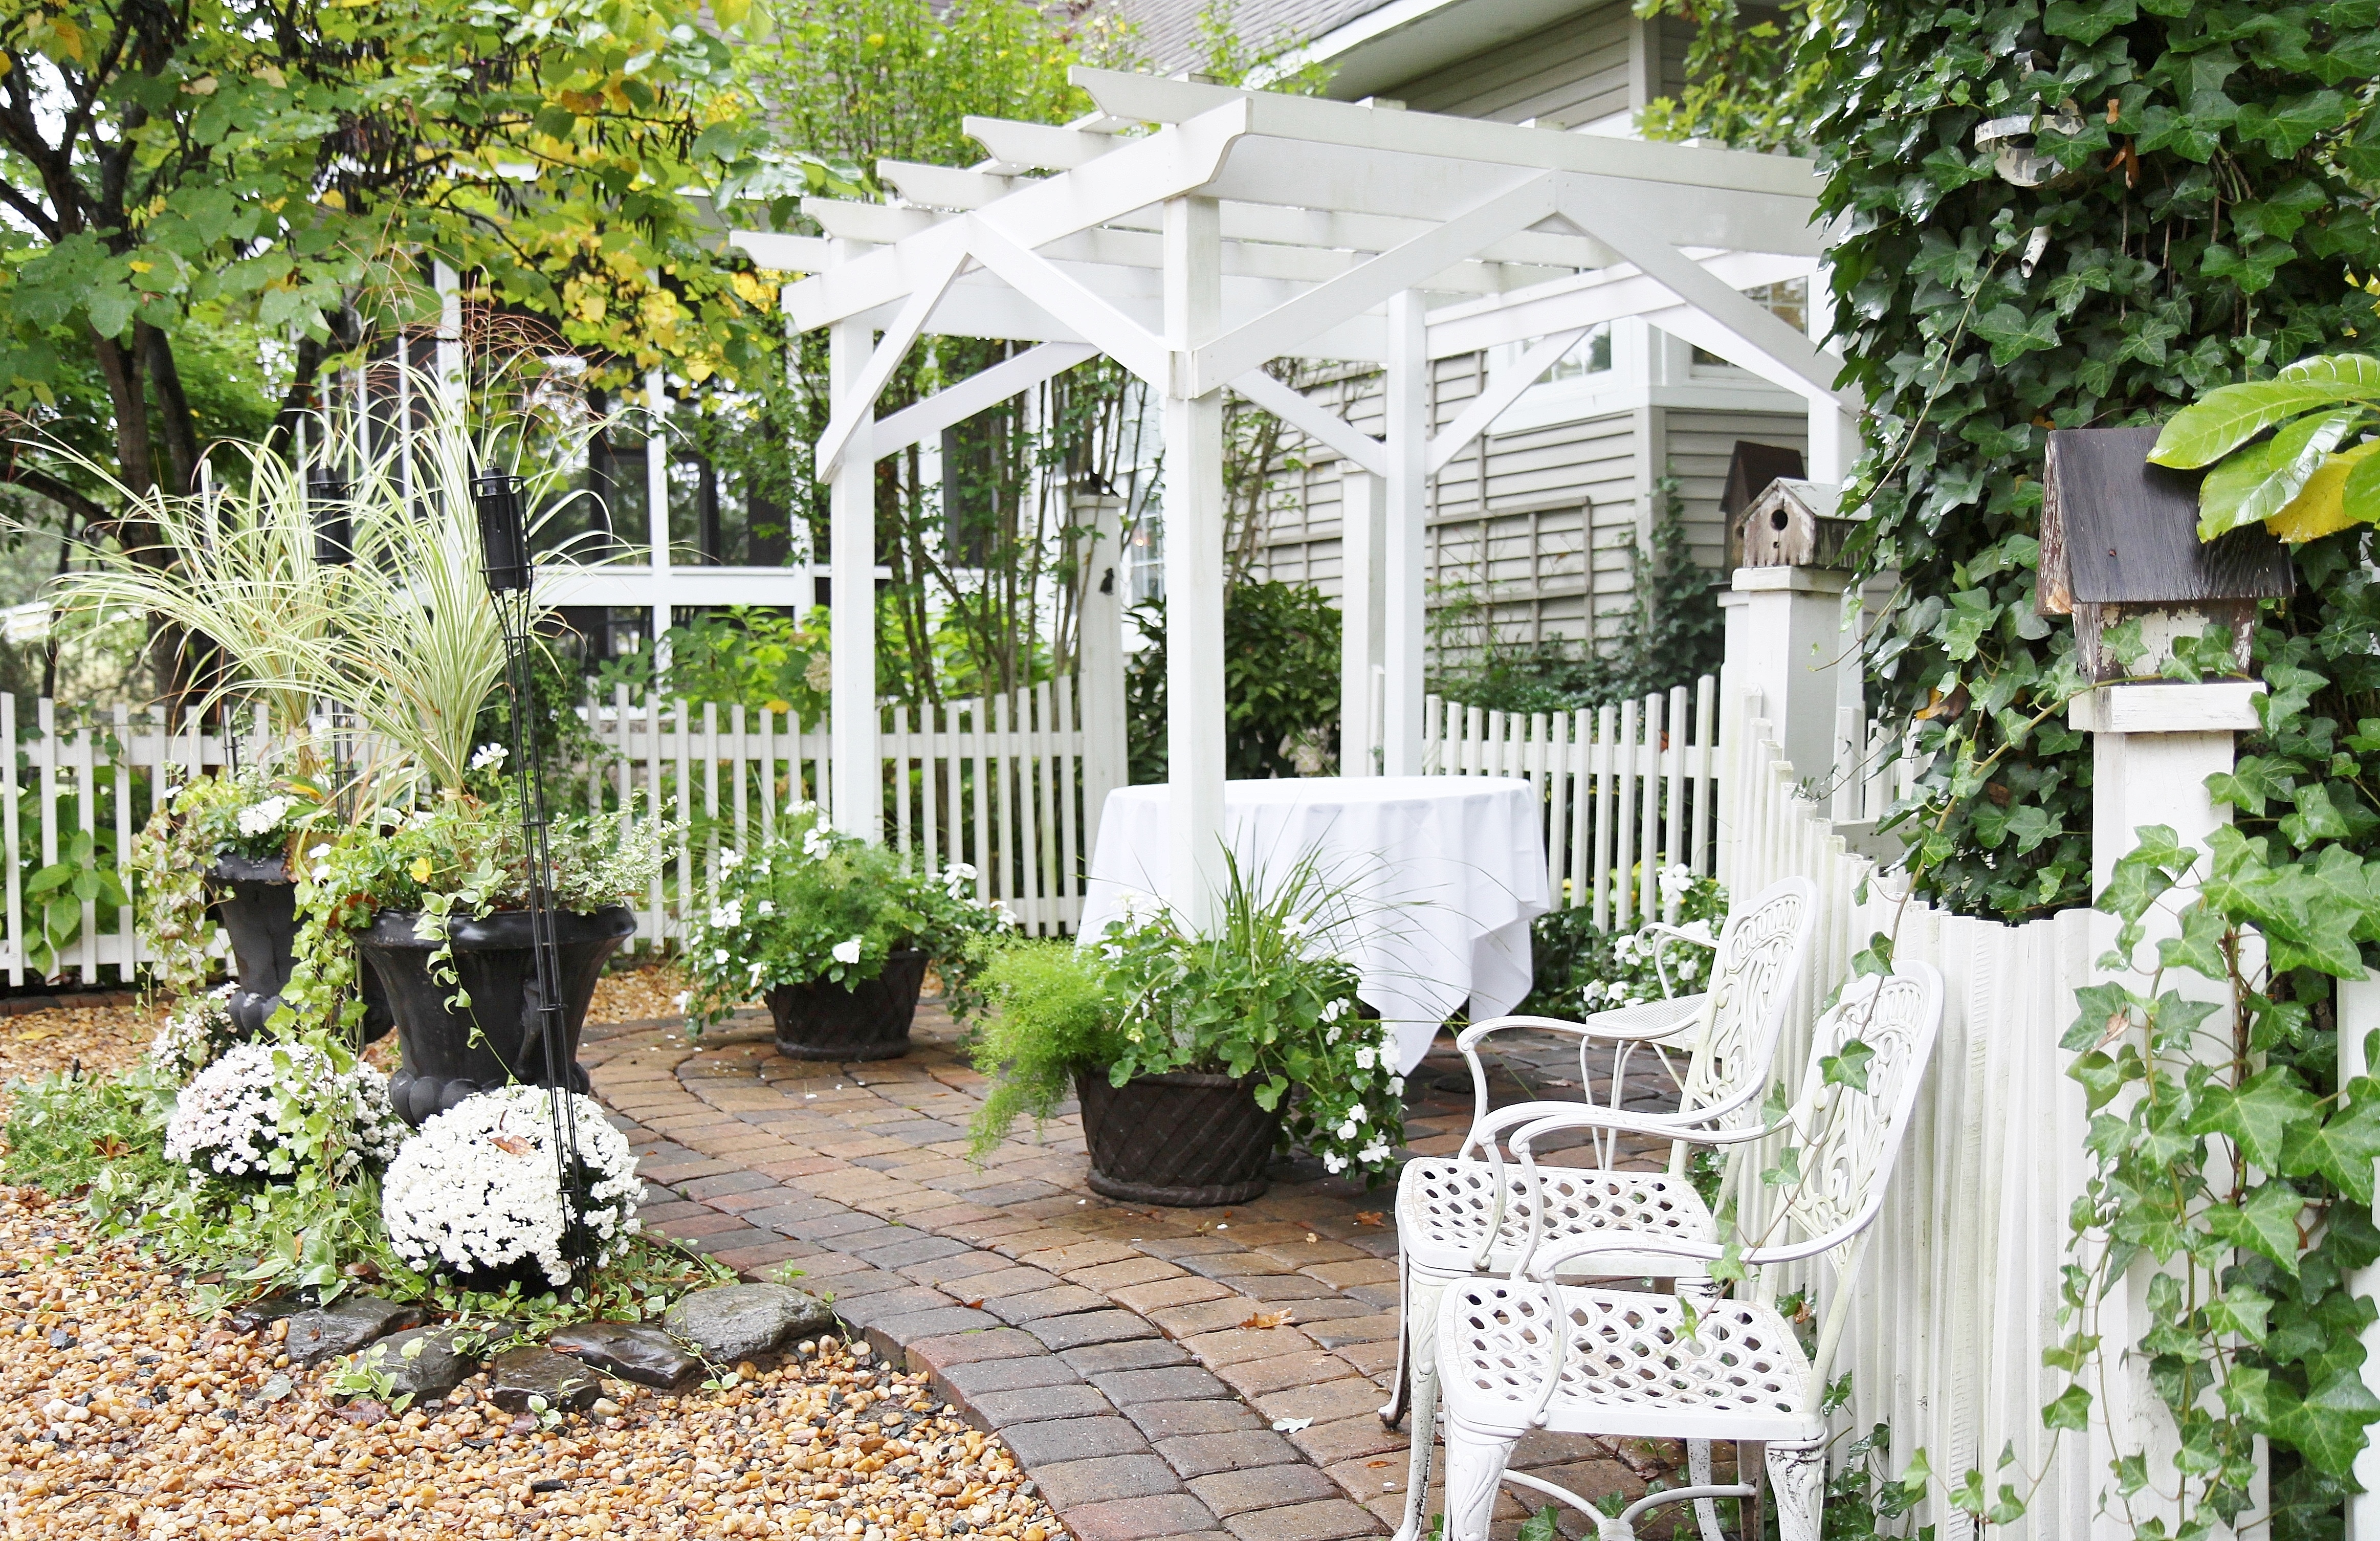 Sign-in table with white tablecloth is under small pergola.